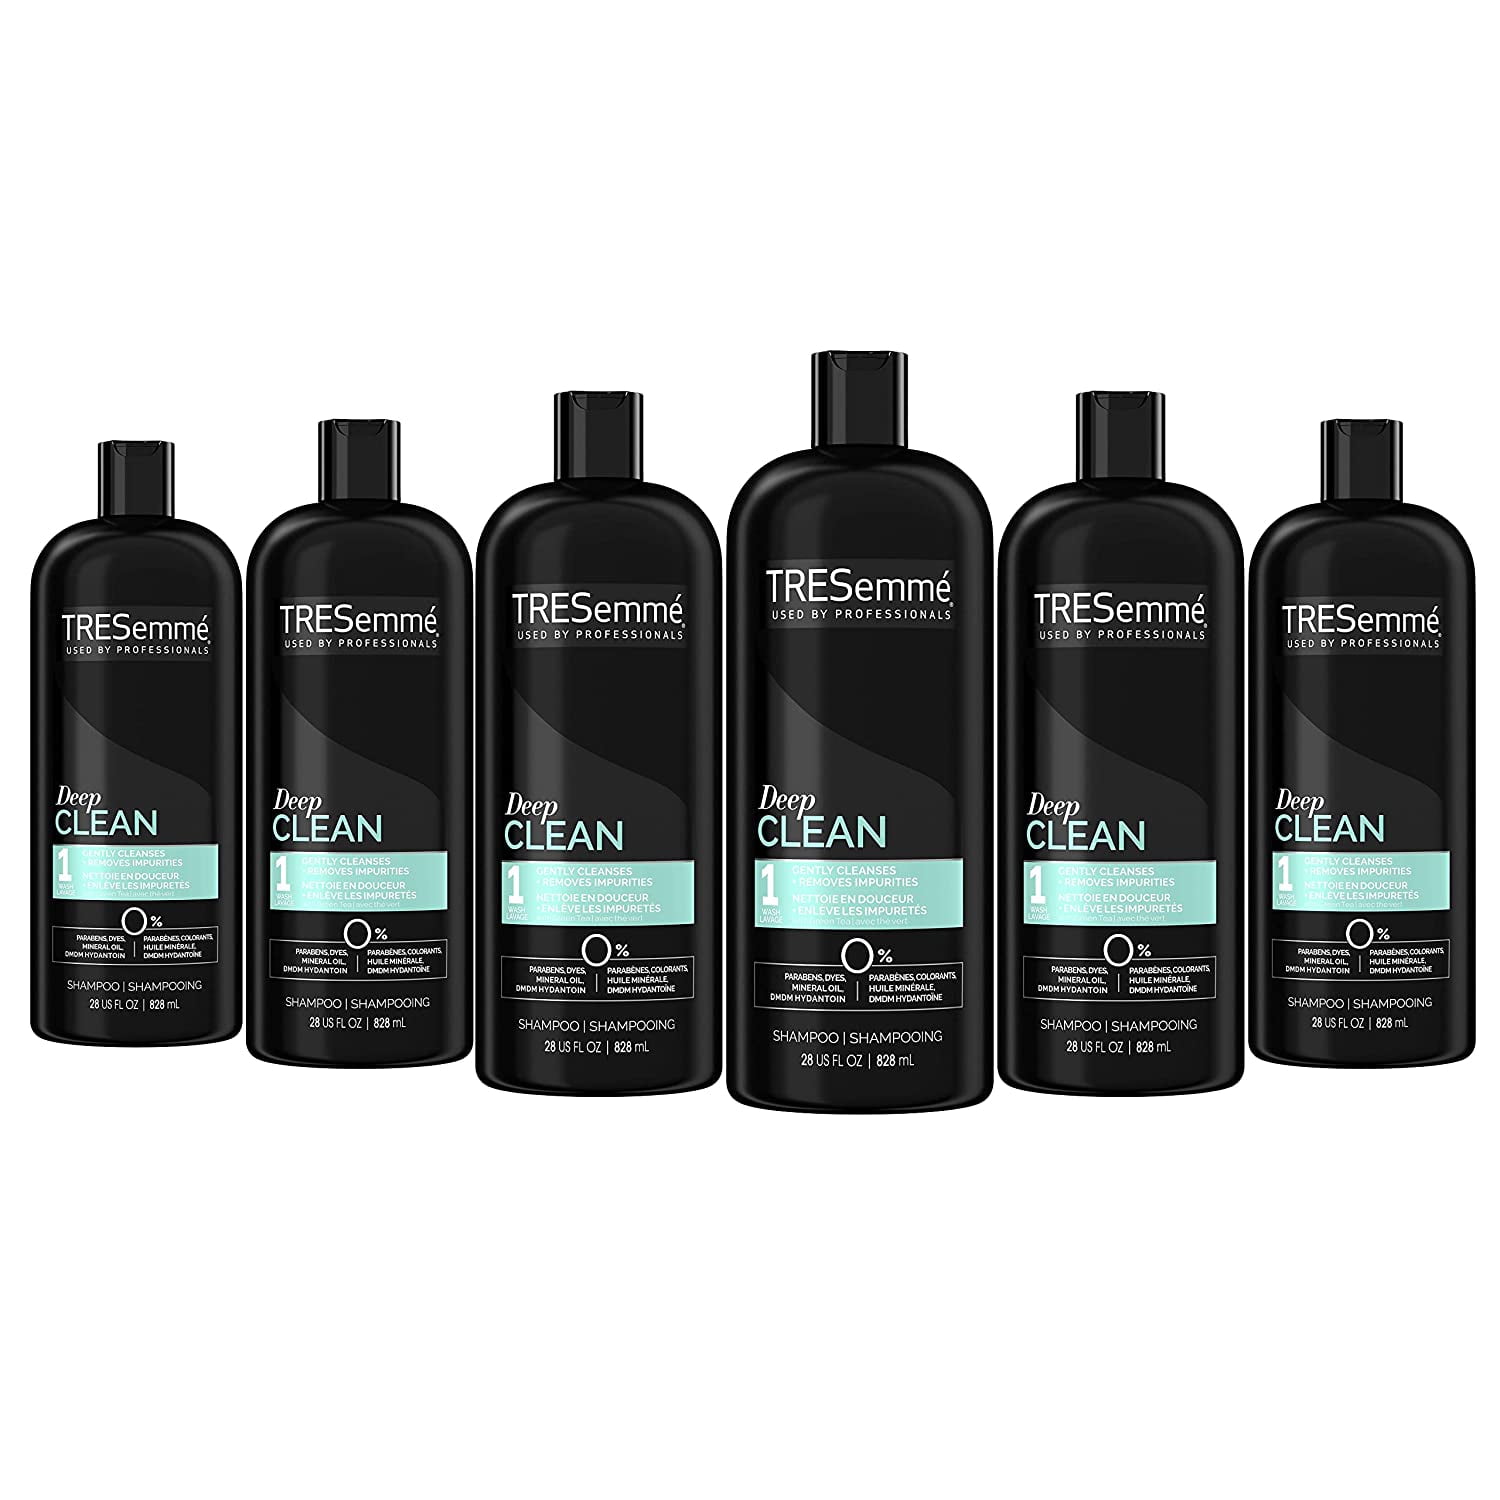 Tresemmé Cleansing Shampoo For Use, Clean And Replenish Vitamin C And Green Tea Clarifying Shampoo Formula, 28 (Pack Of 6) - Walmart.com